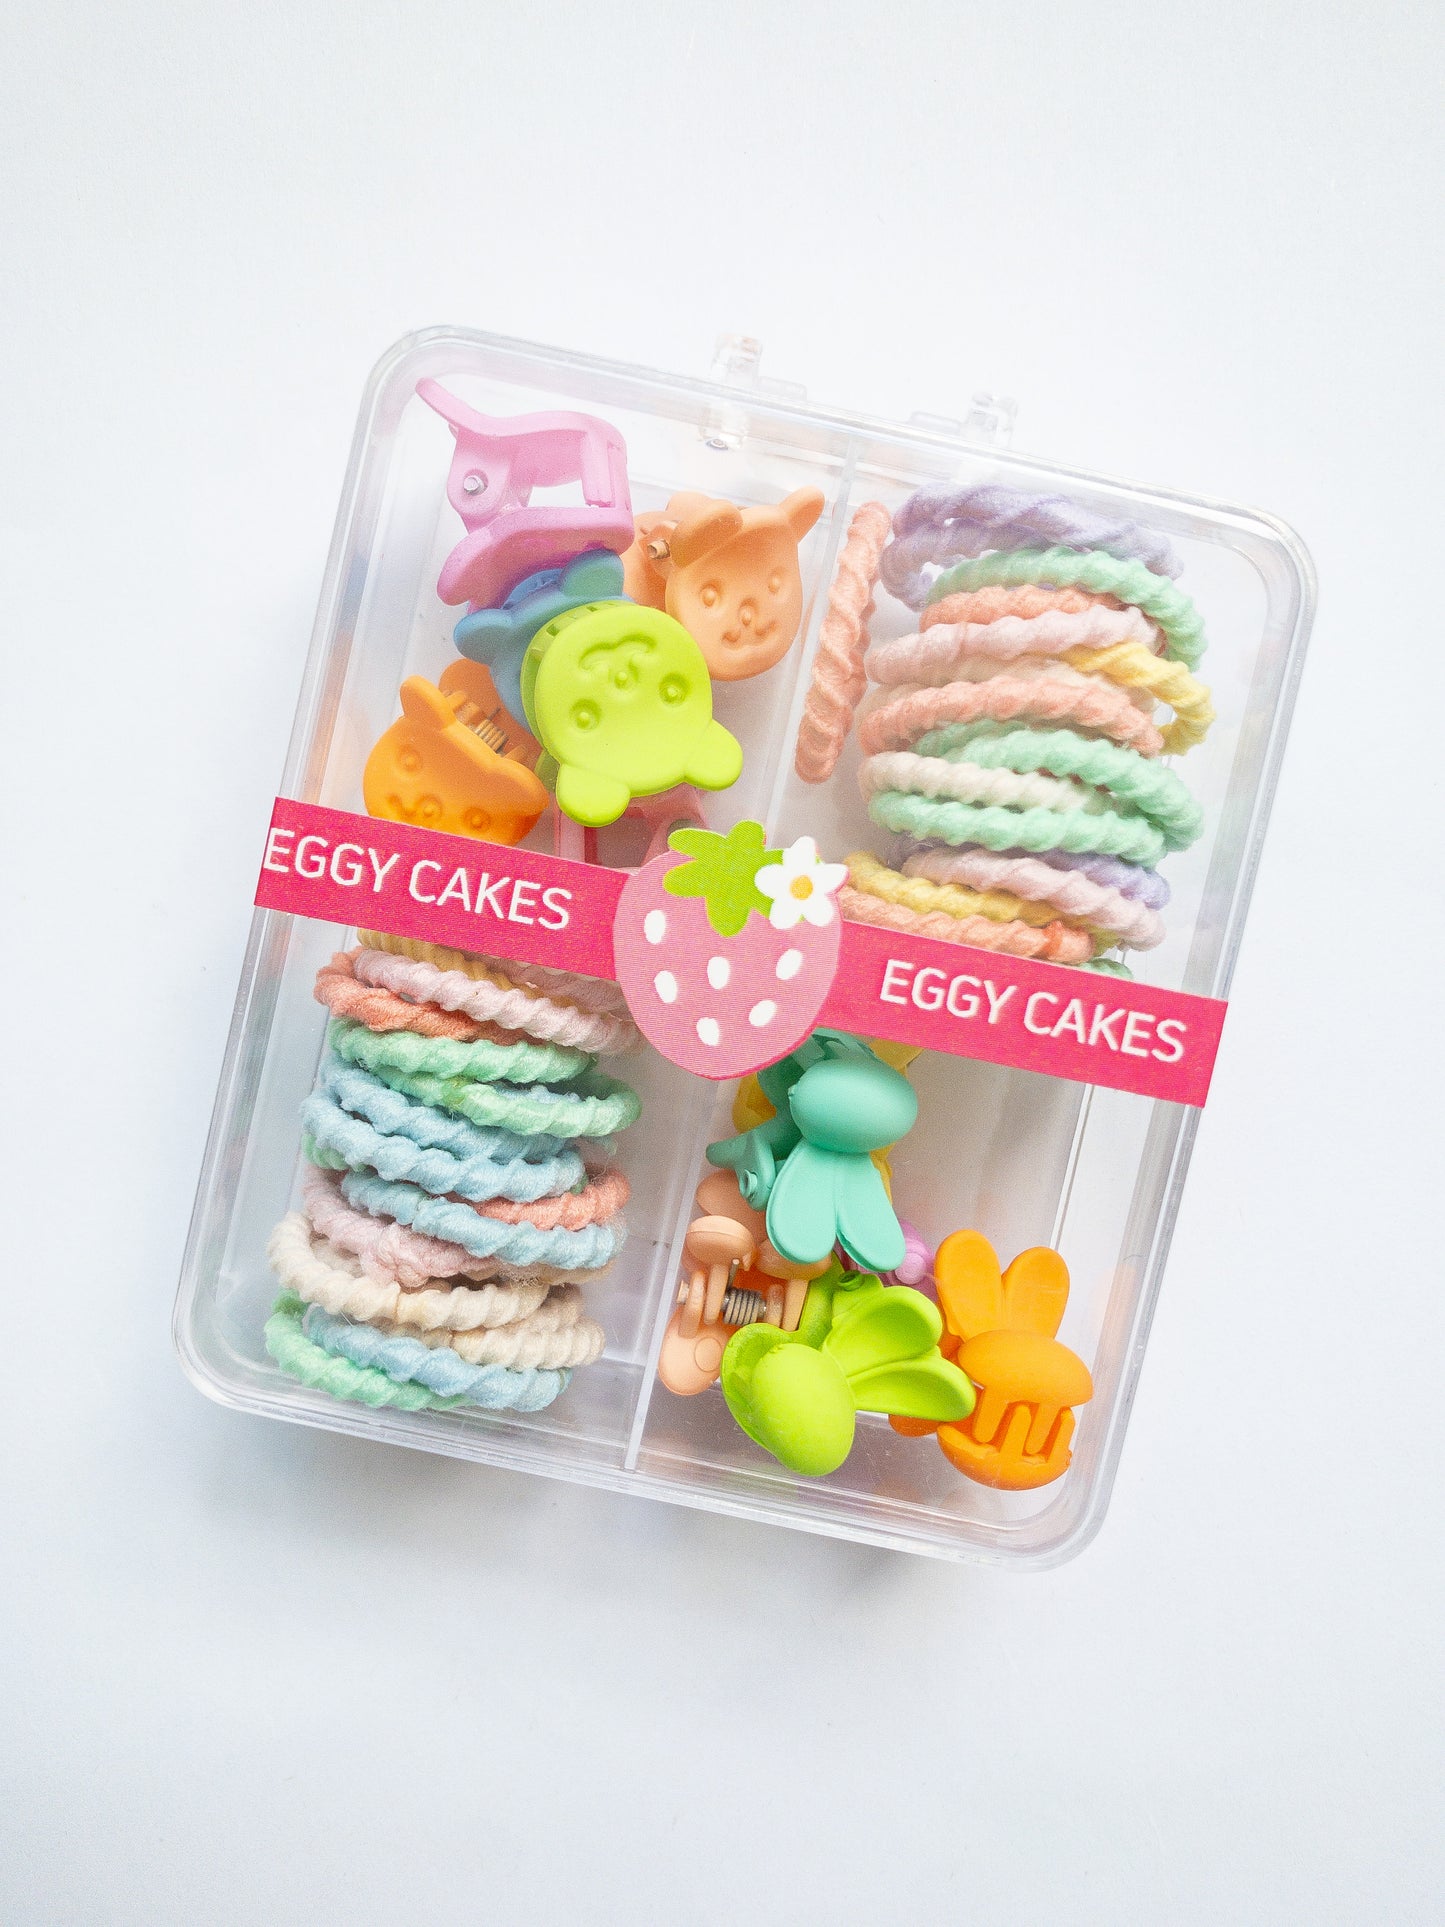 This mini hair claw set is the one you need! A boxed set with a mix of mini bunny hair claws and a mix of mini bear hair claws along with small hair ties. The hair ties are super soft, no tug and thin, perfect for those cute pigtails or braids. Clip the hair claws throughout to make that fun style.